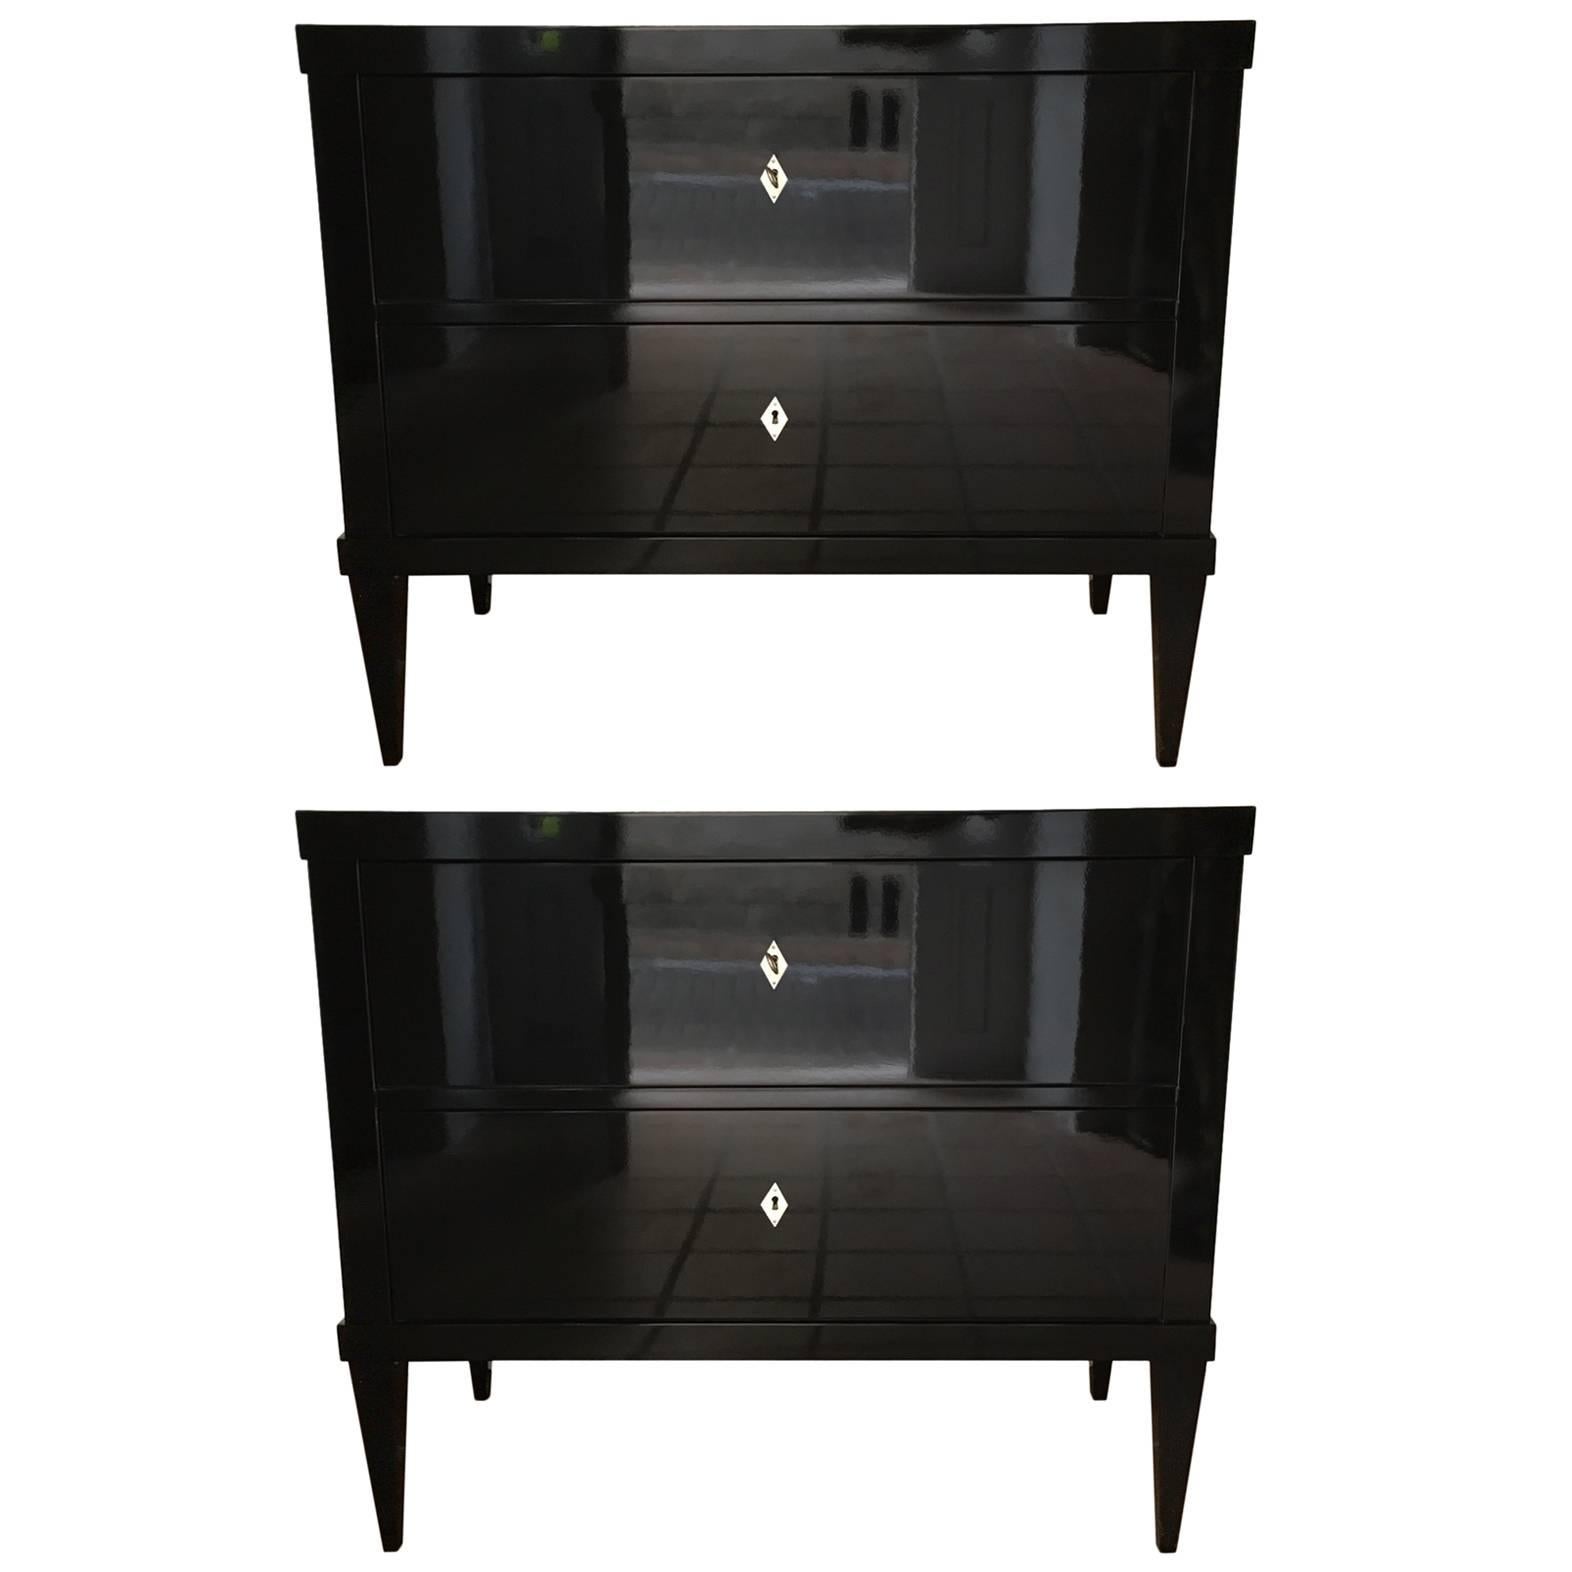 Pair of Black Lacquered Biedermeier Style Commodes